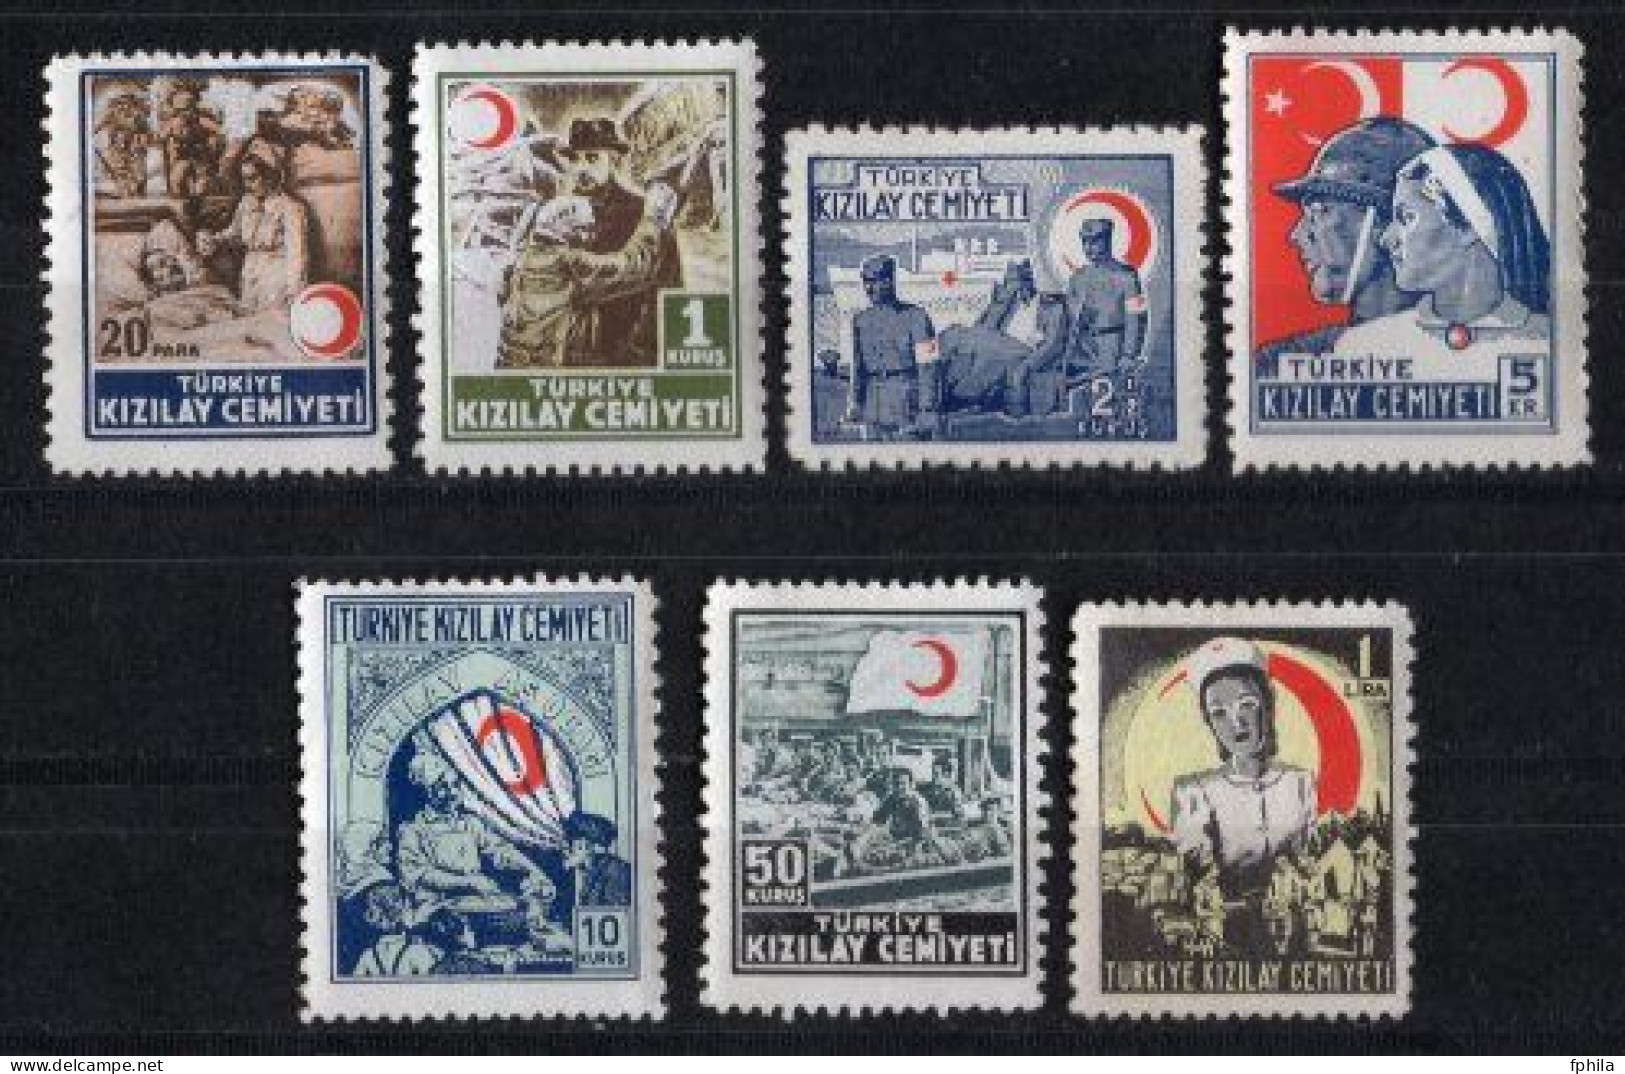 1944 - 1945 TURKEY RED CRESCENT SOCIETY STAMPS ACHIEVEMENTS OF THE RED CRESCENT MINT WITHOUT GUM - Timbres De Bienfaisance